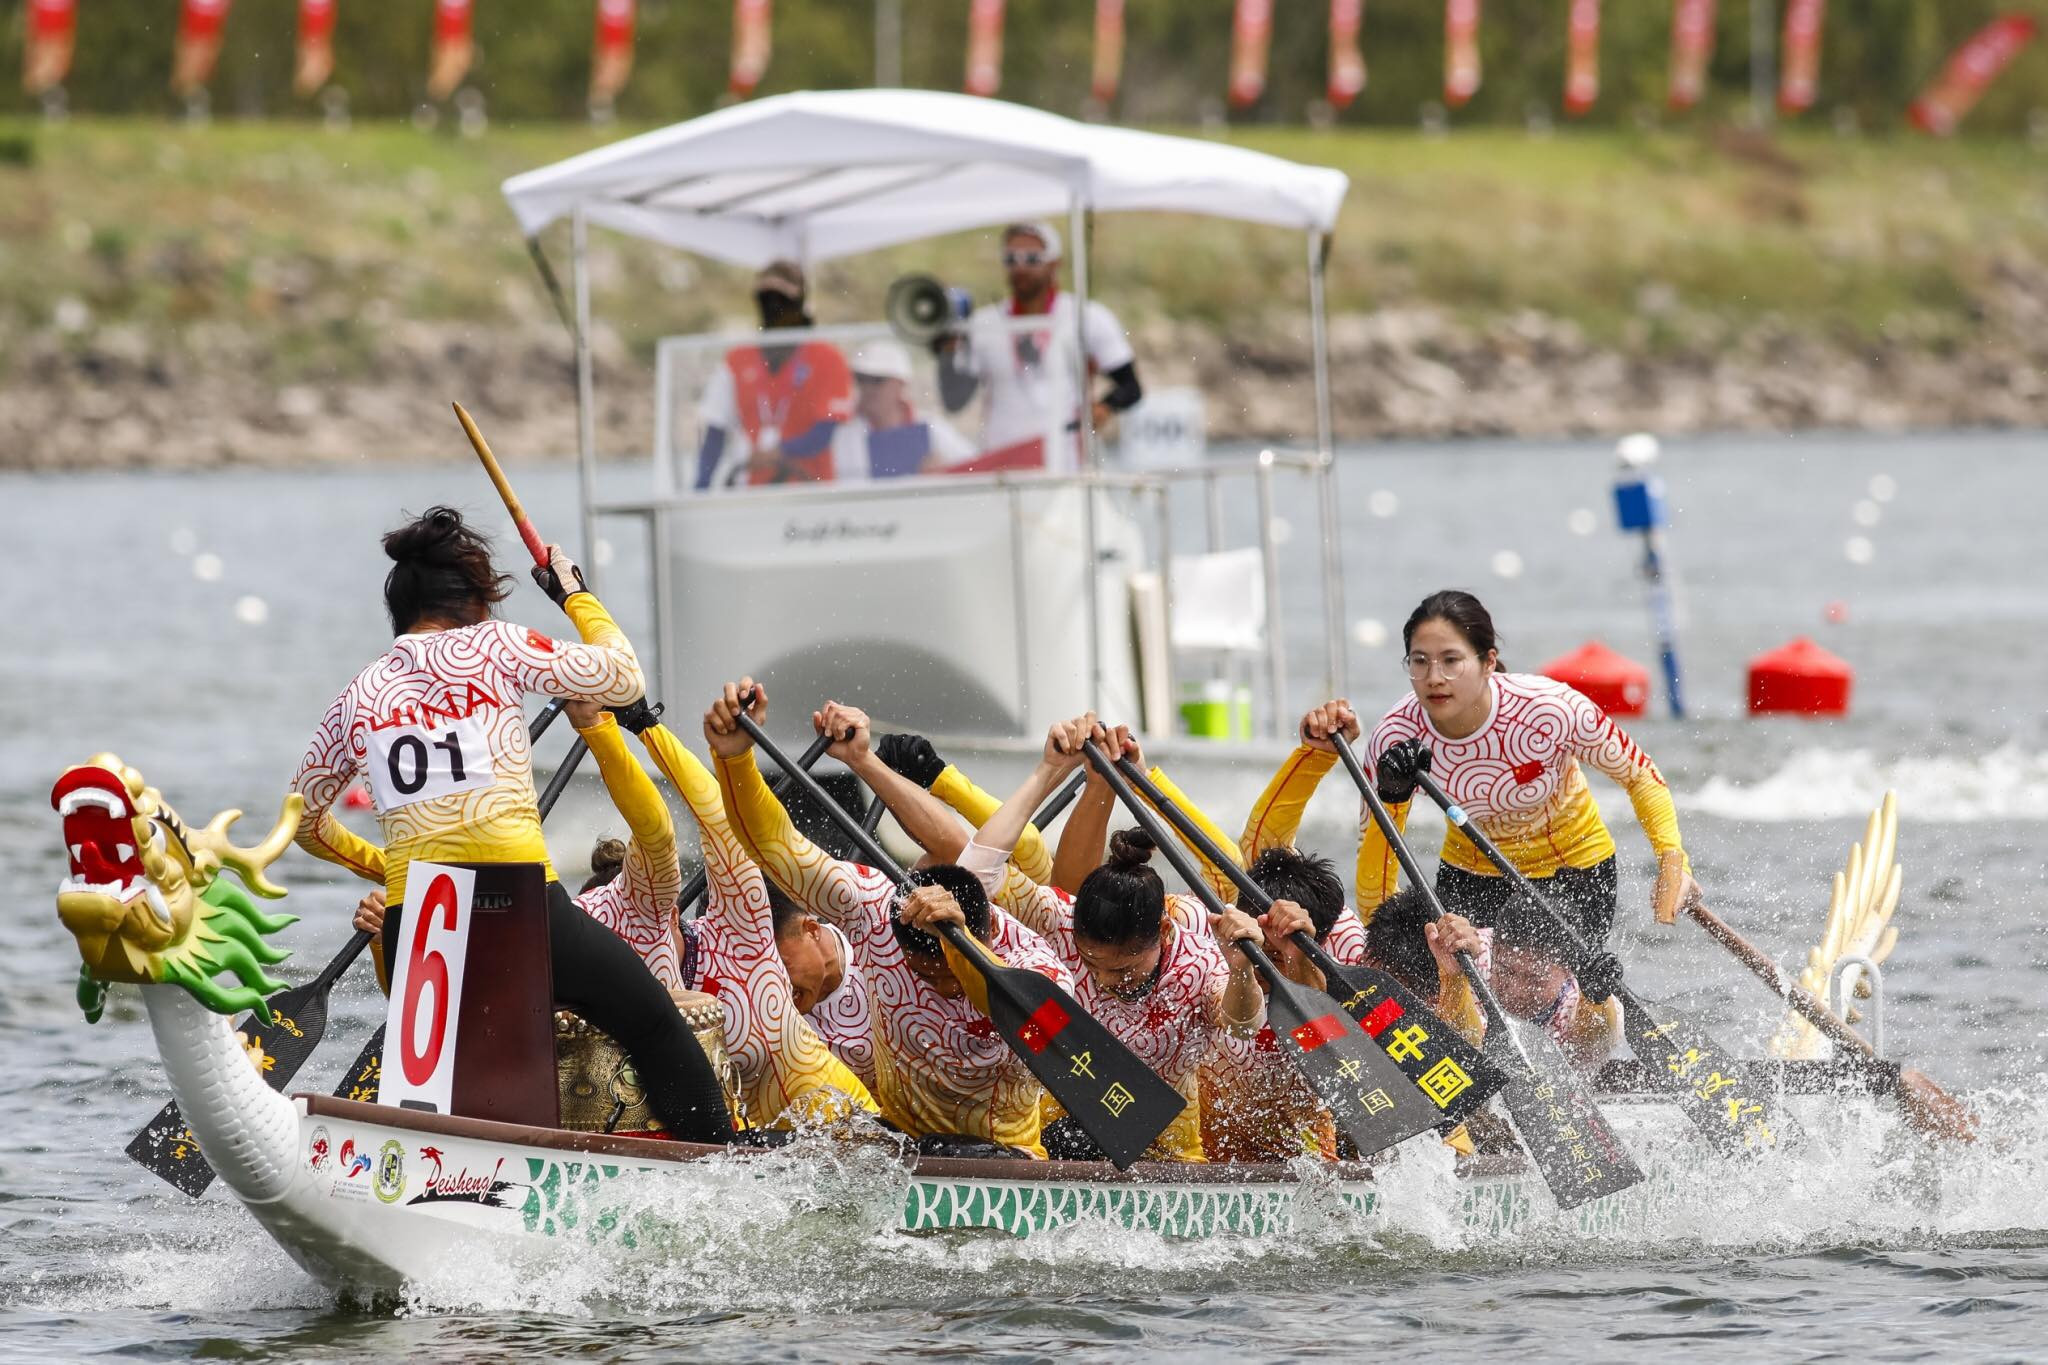 China broke a world record on the final day of the World Dragon Boat Racing Championships in Thailand ©Facebook